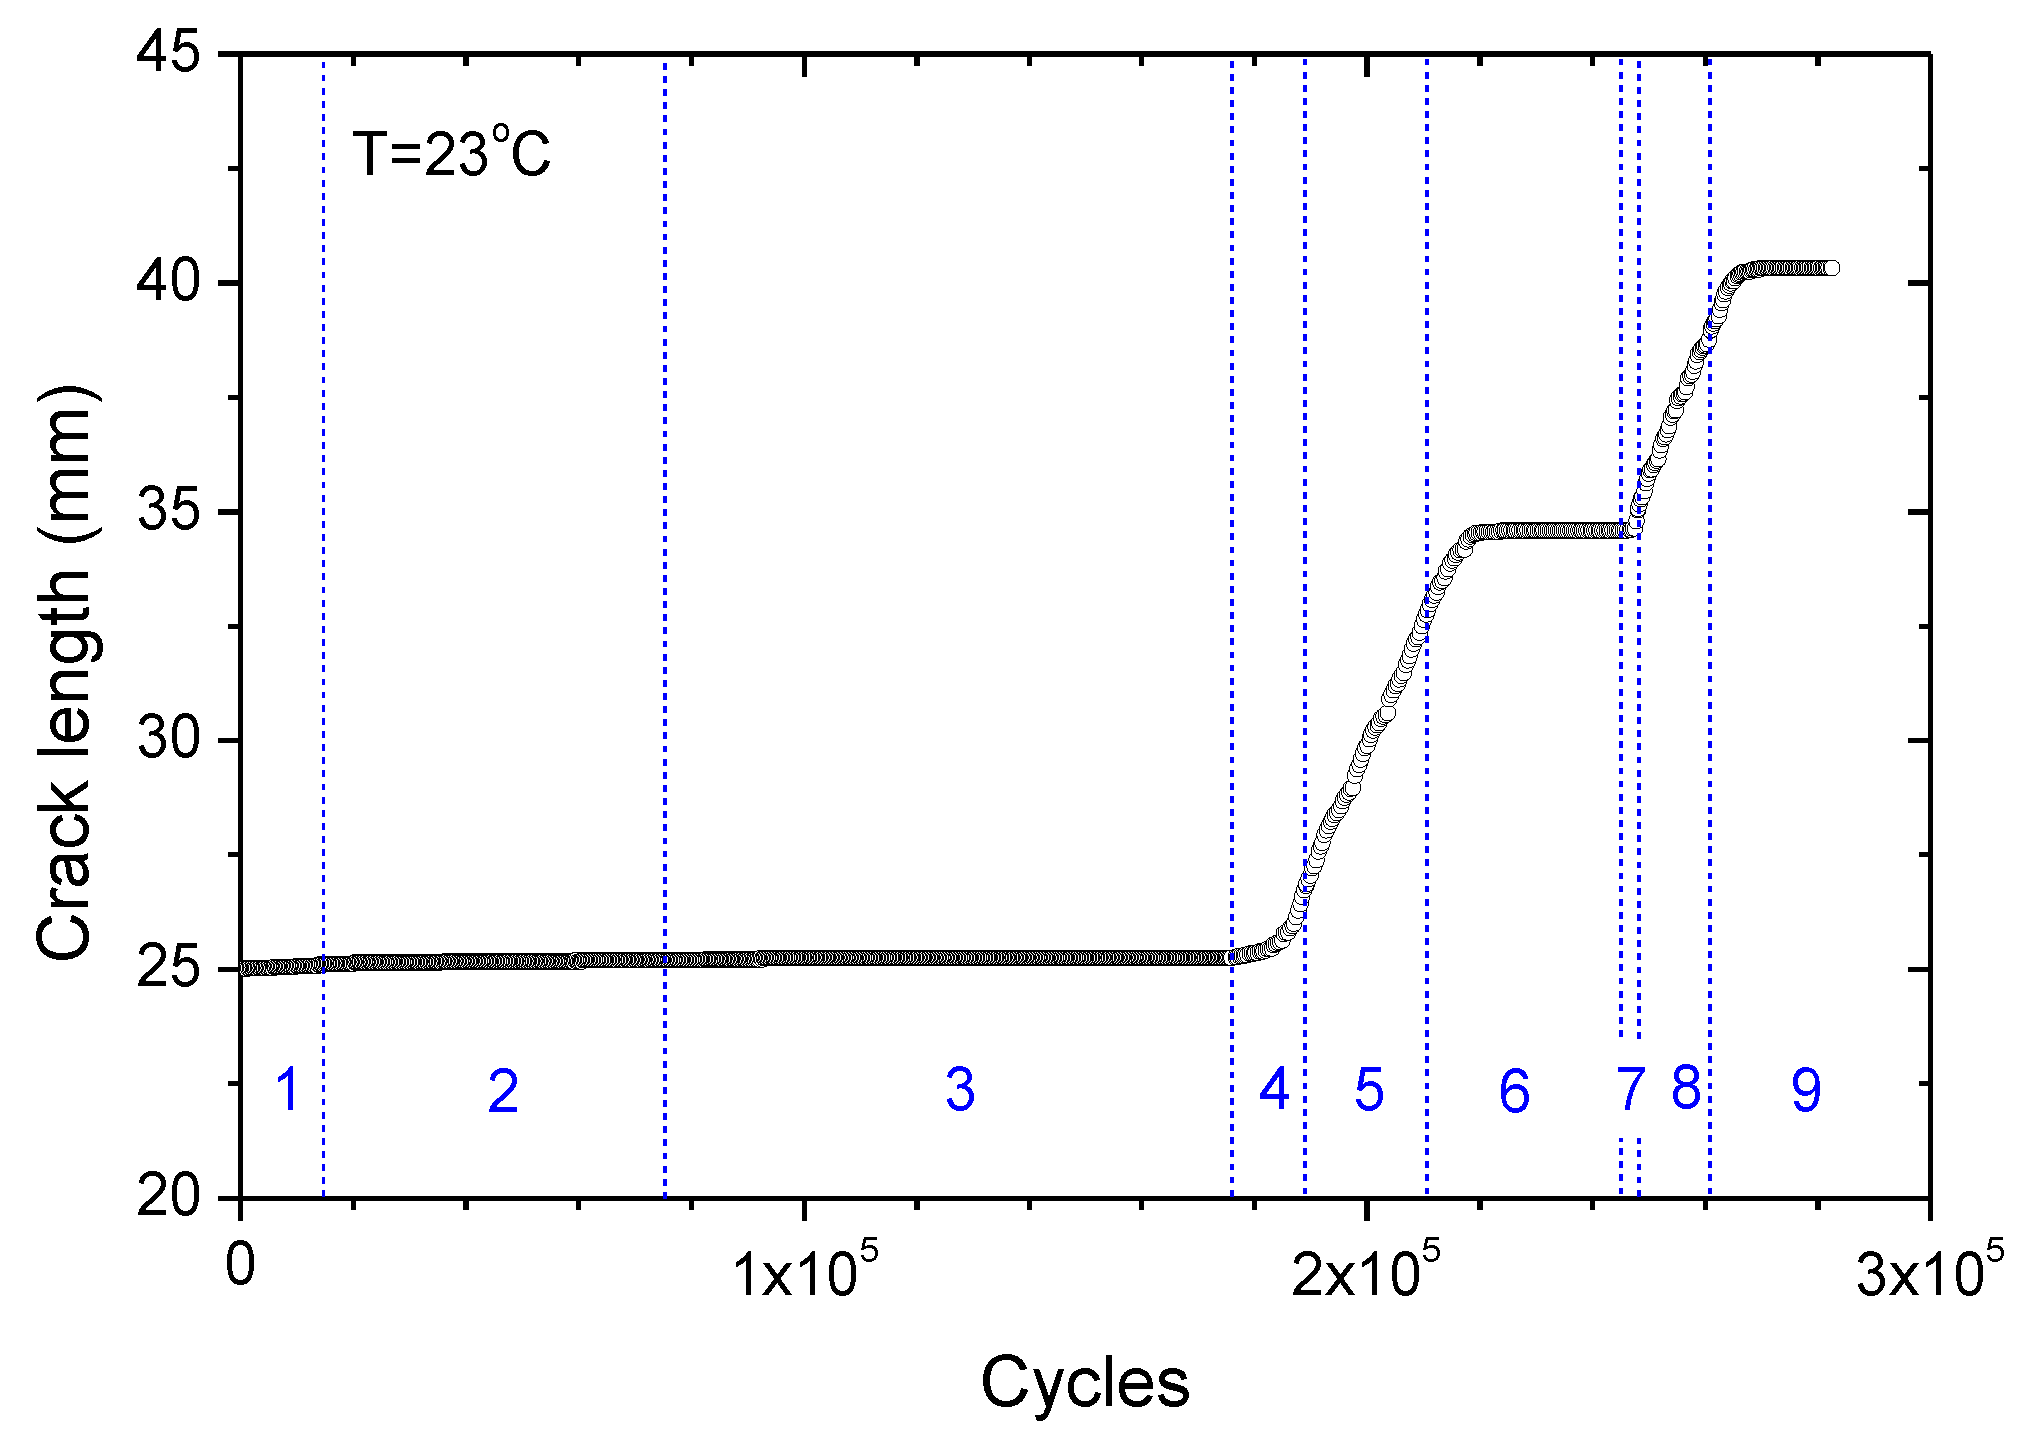 Temperature effects on crack size. The temperatures are 70 °C, 75